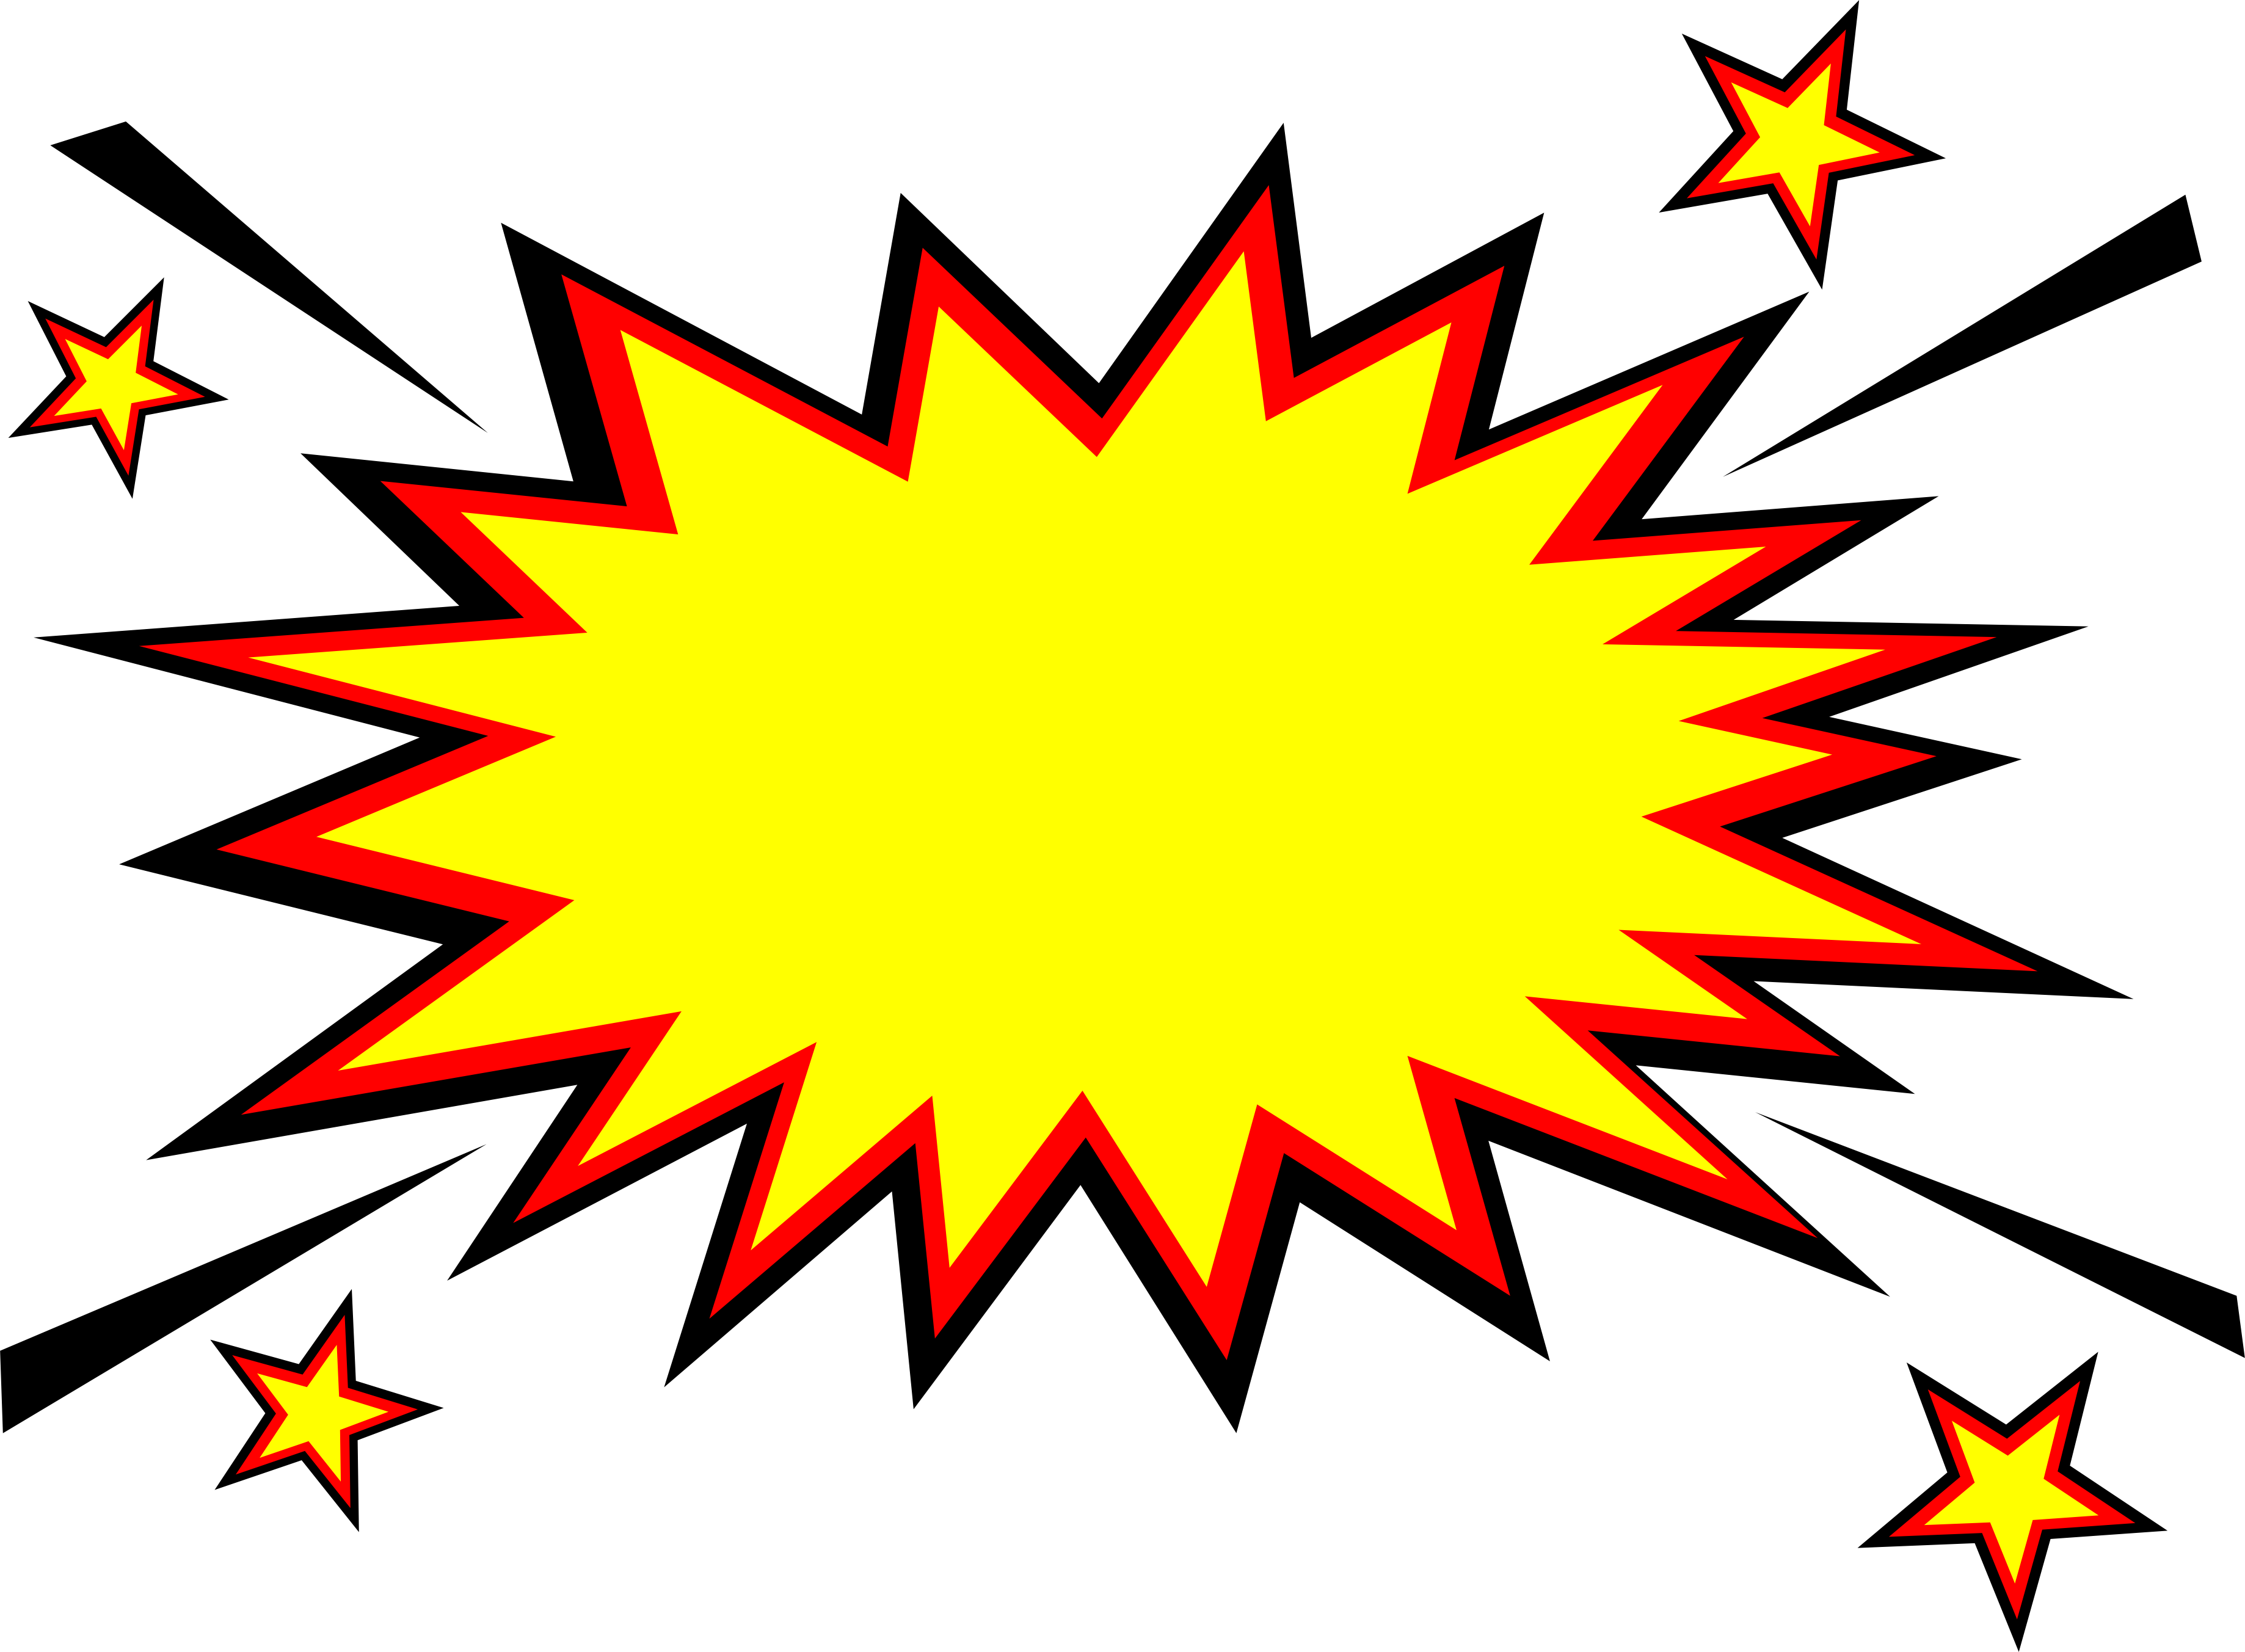  comic boom explosion. Png to vector free